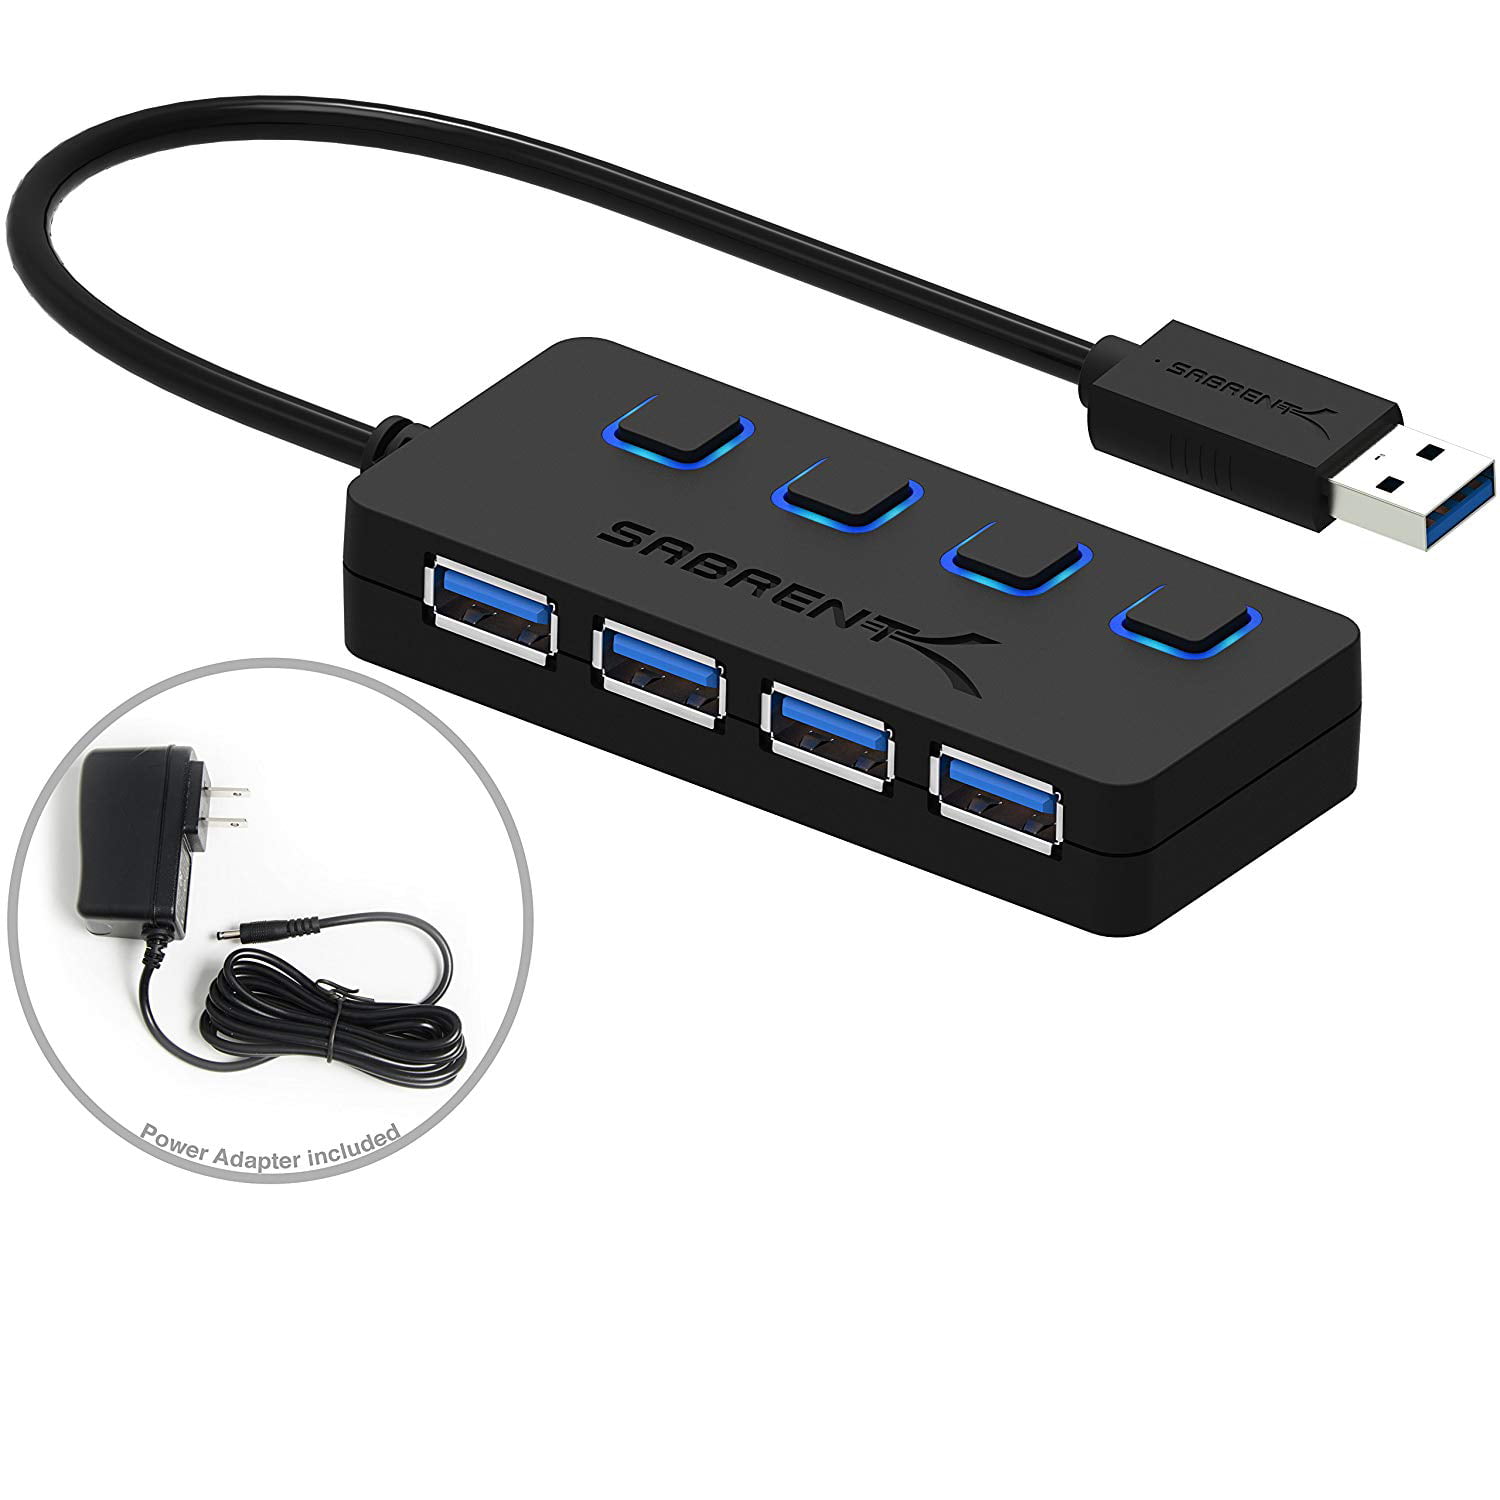 LIUDOU USB 3.0 Hub 4 Port Ultra Slim USB 3.0 Data Hub One Drag Four Splitter with Individual On/Off Switches and LEDs USB 3.0 Extension Splitter 